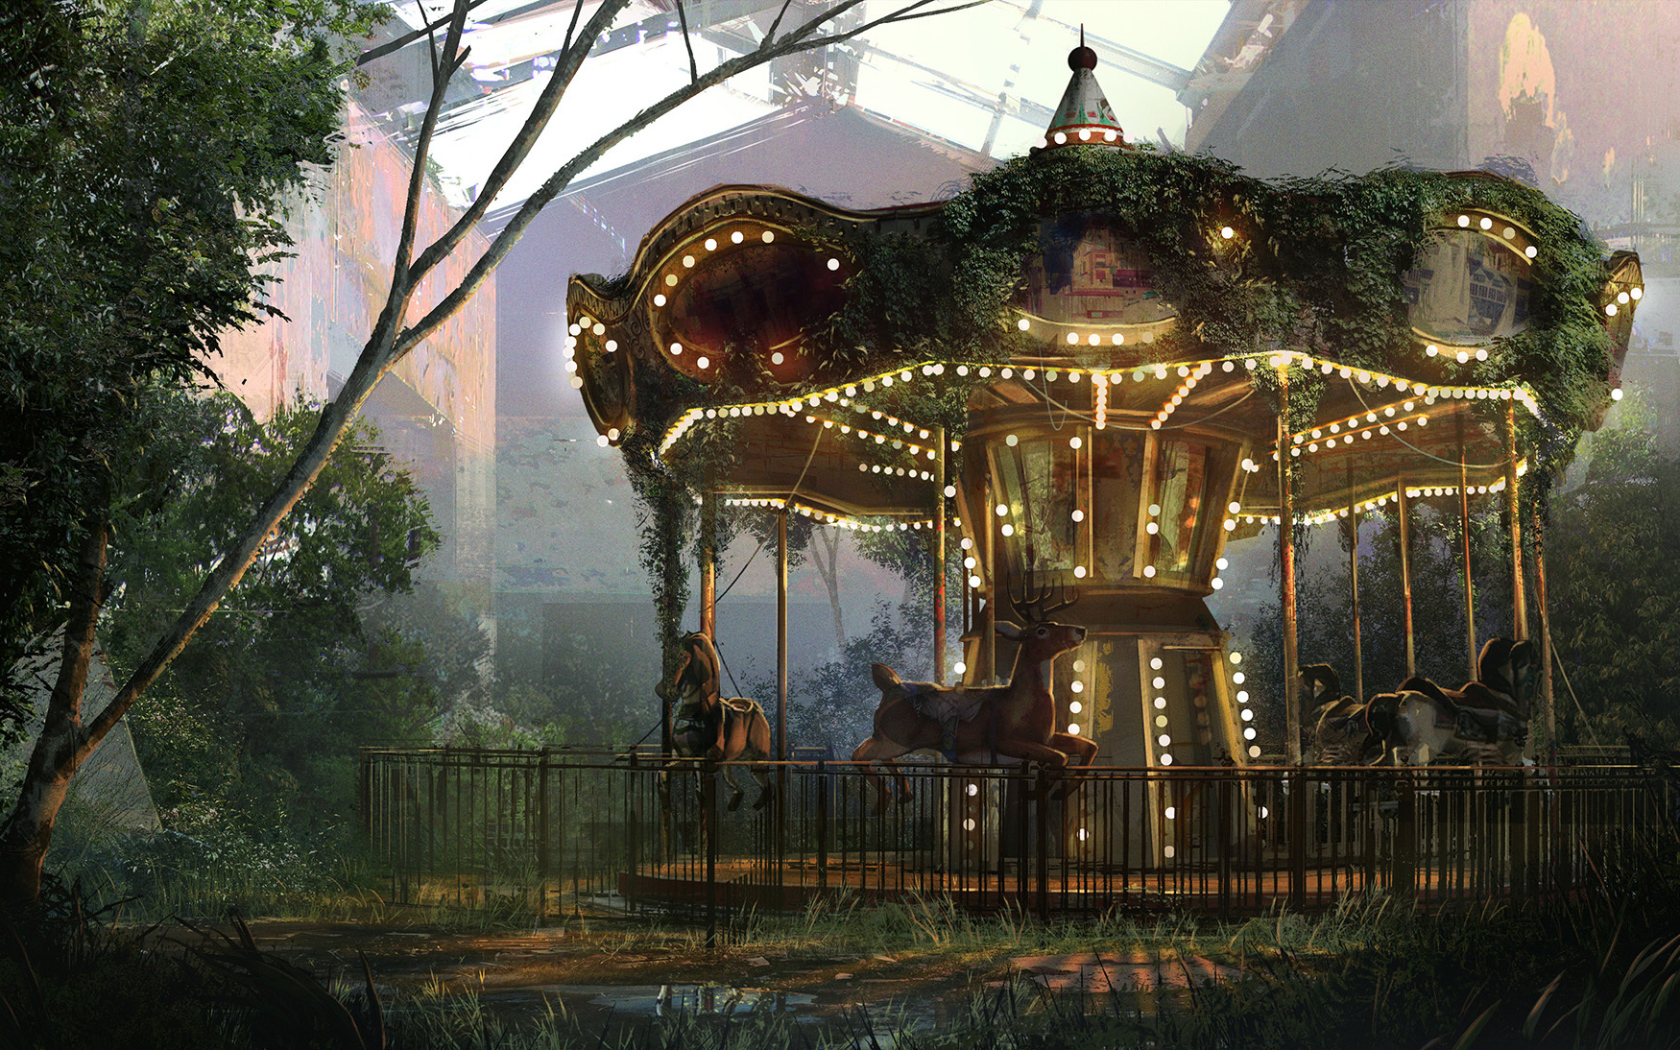 The Last of us : the abandoned park